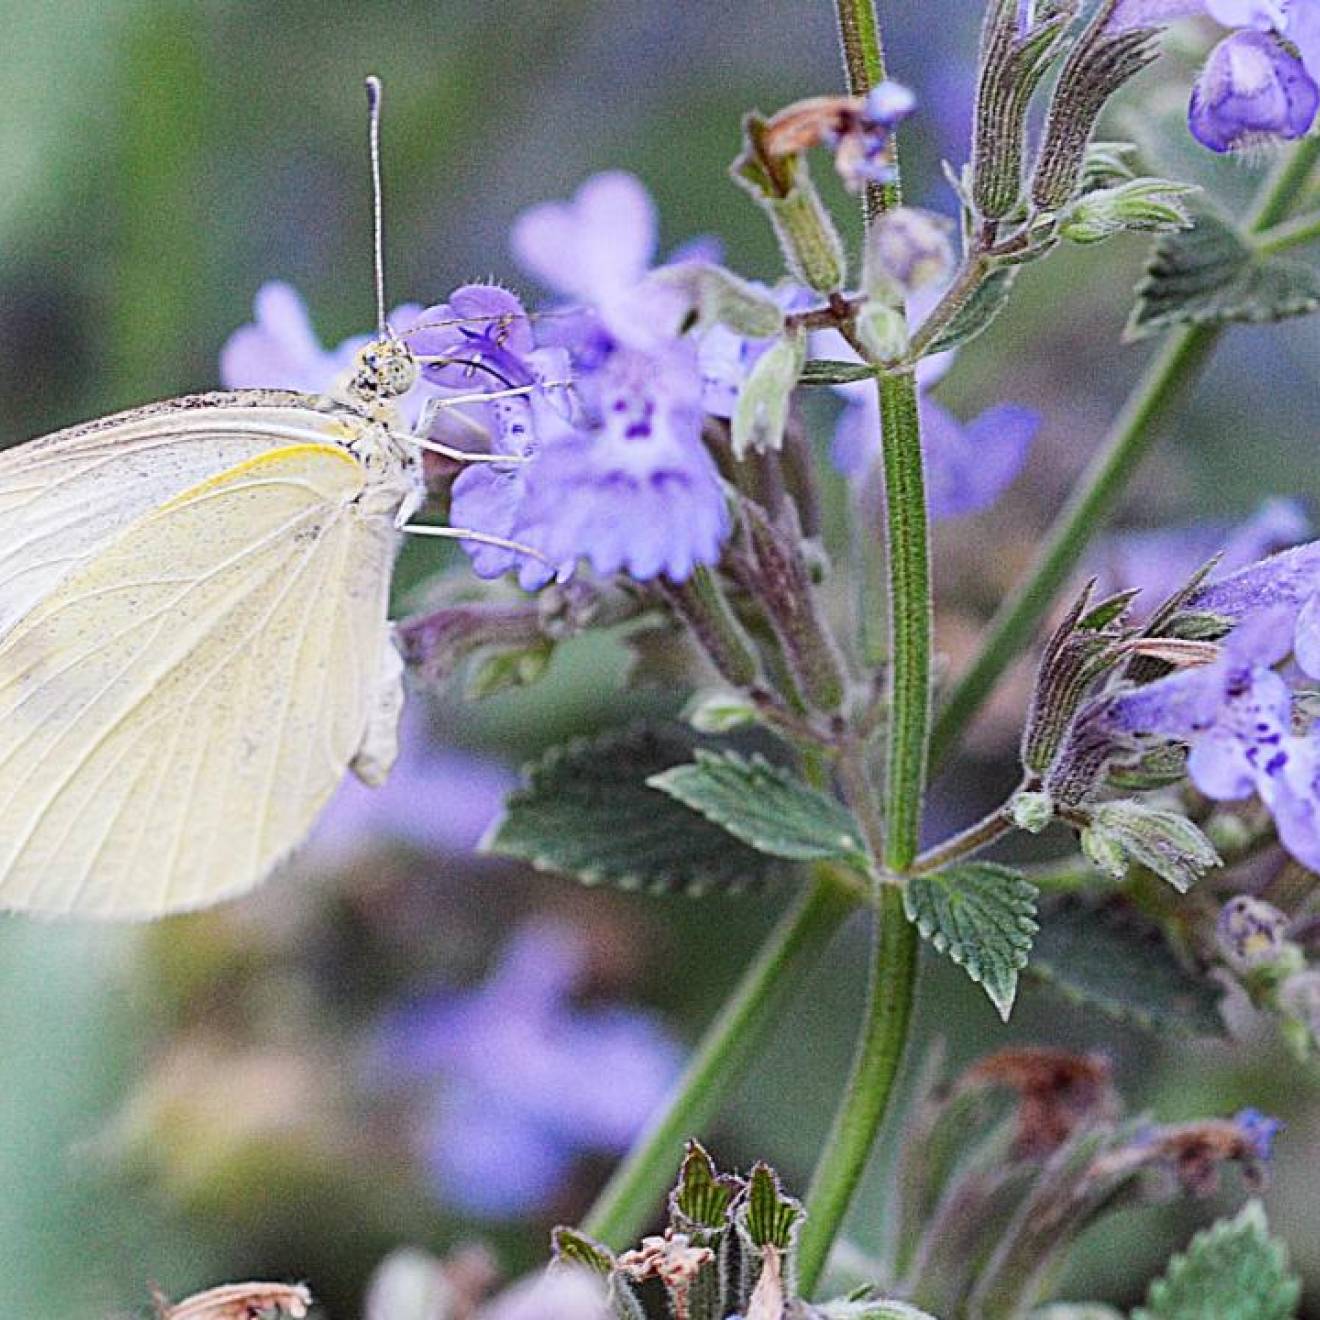 Cabbage white butterfly on lilac-colored flowers